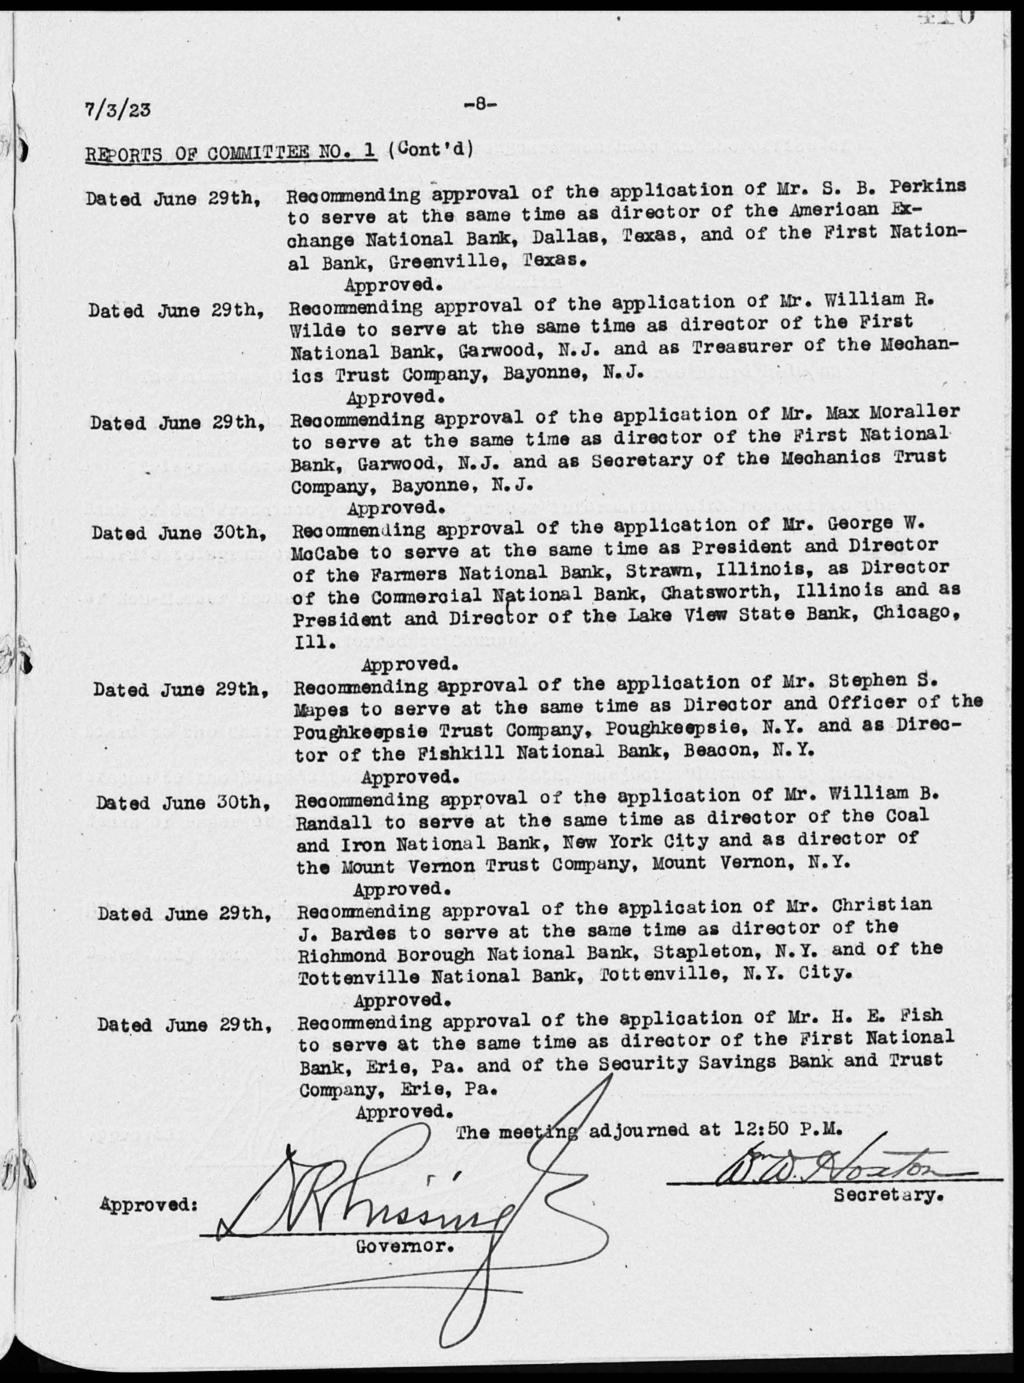 7/3/23-8- RELpORTS OF COMMITTEE NO. 1 (Ciont'd) Dated June 29th, Recommending approval of the application of Mr. S. B.